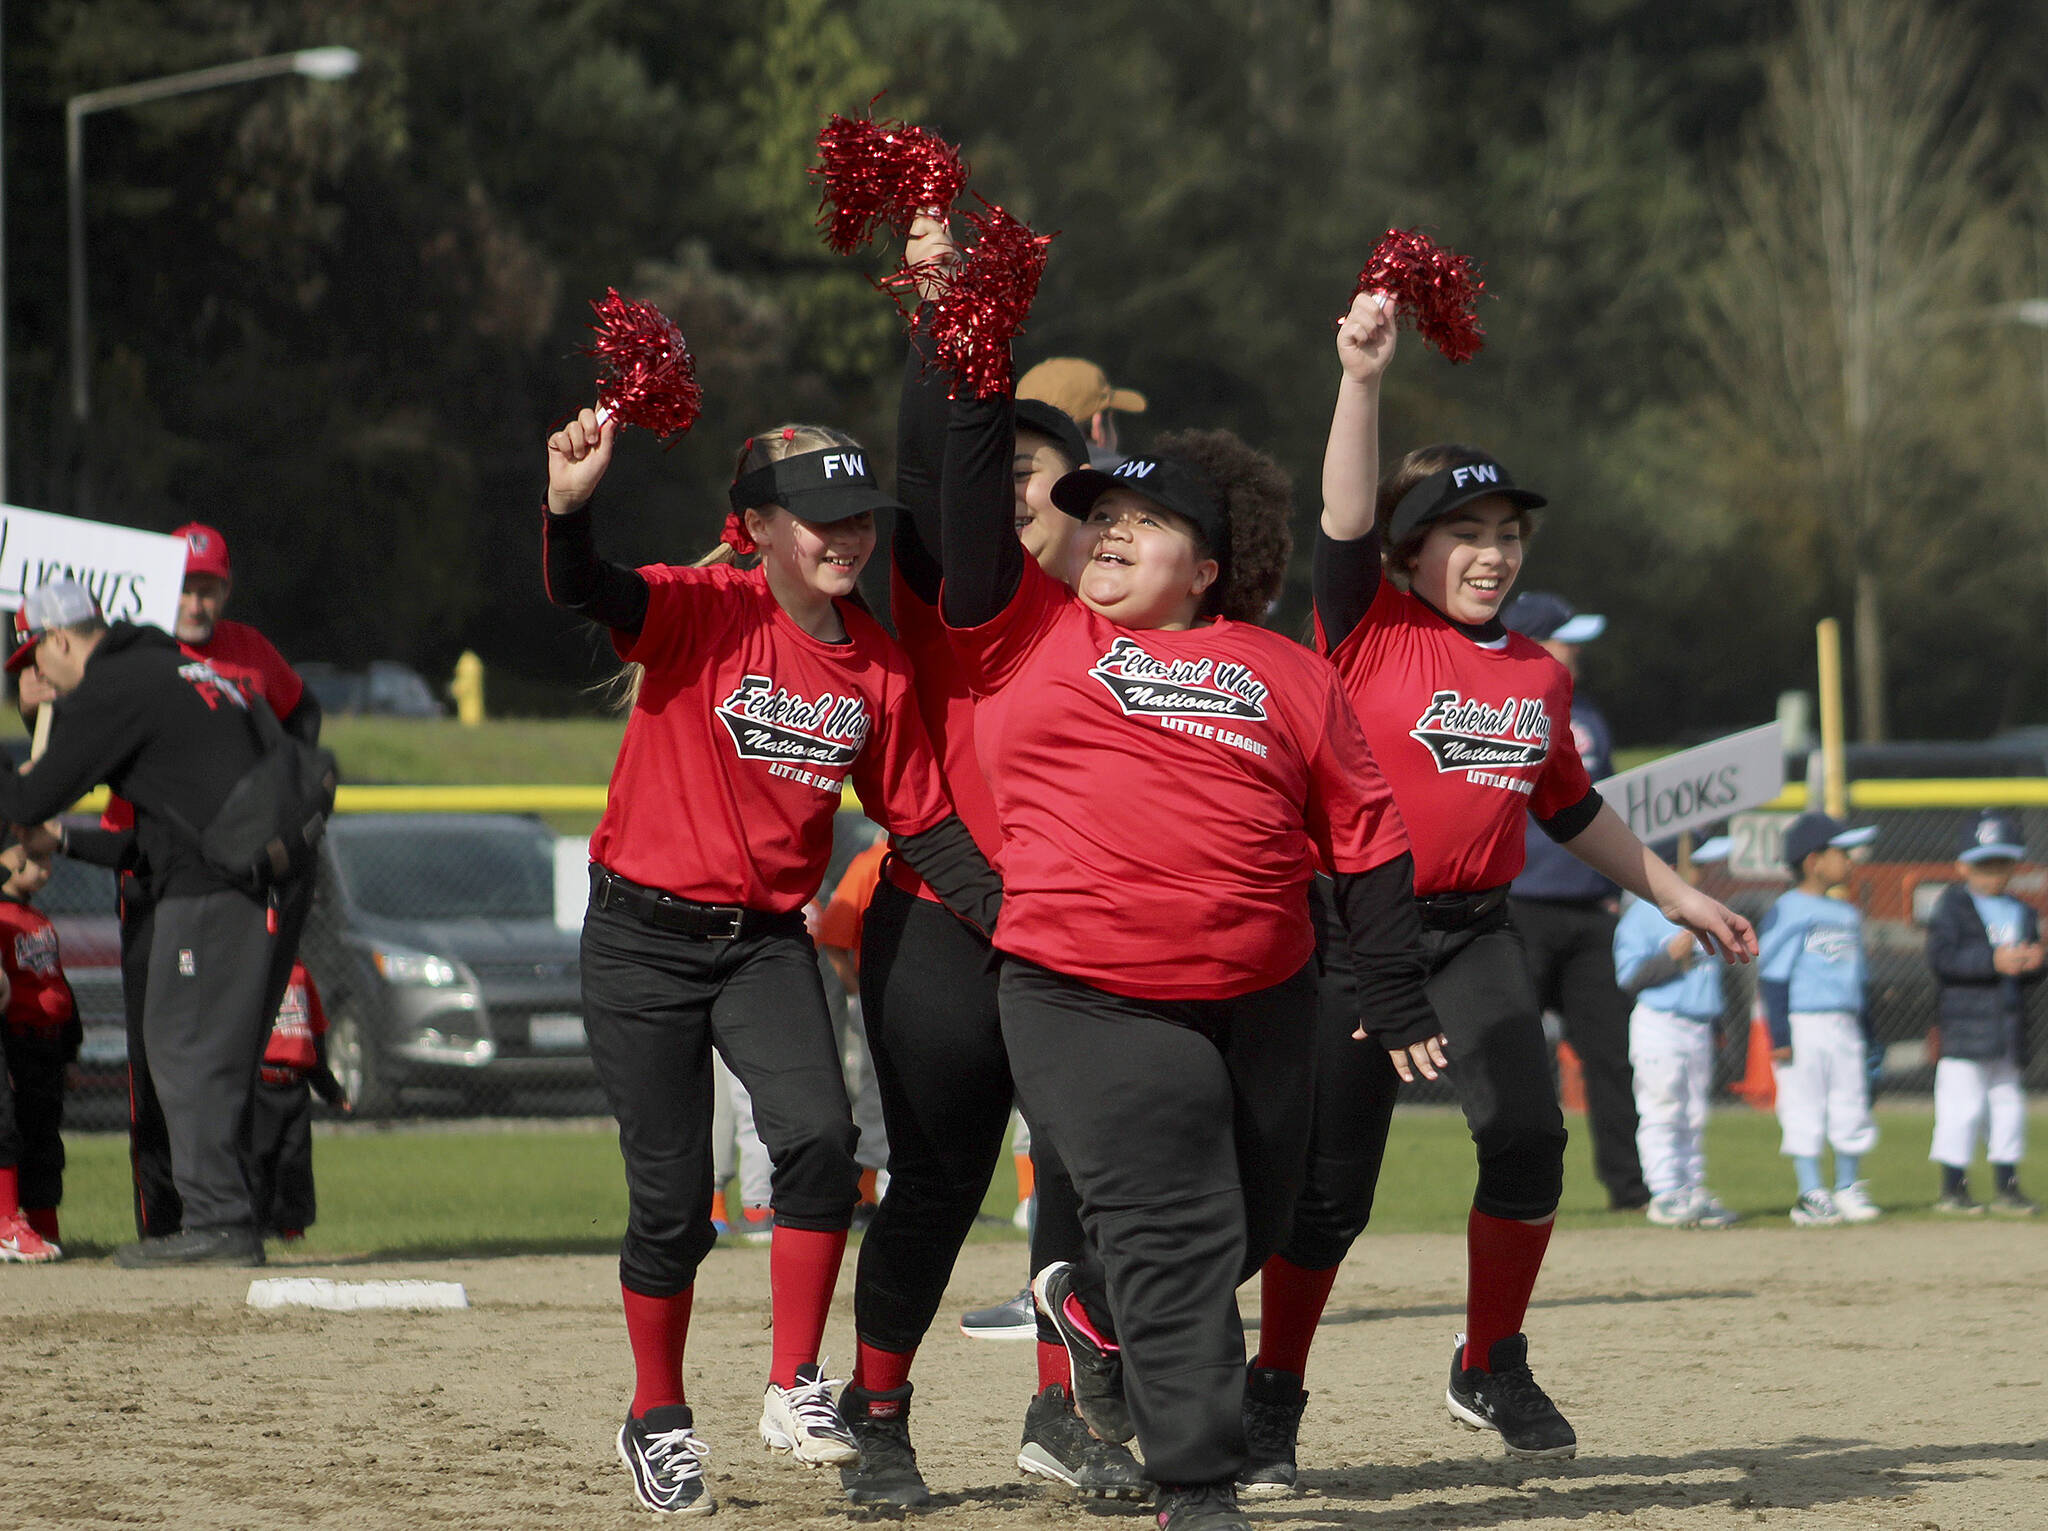 Fastpitch players carry sparkly pompoms as they run the bases on April 23. Olivia Sullivan/the Mirror